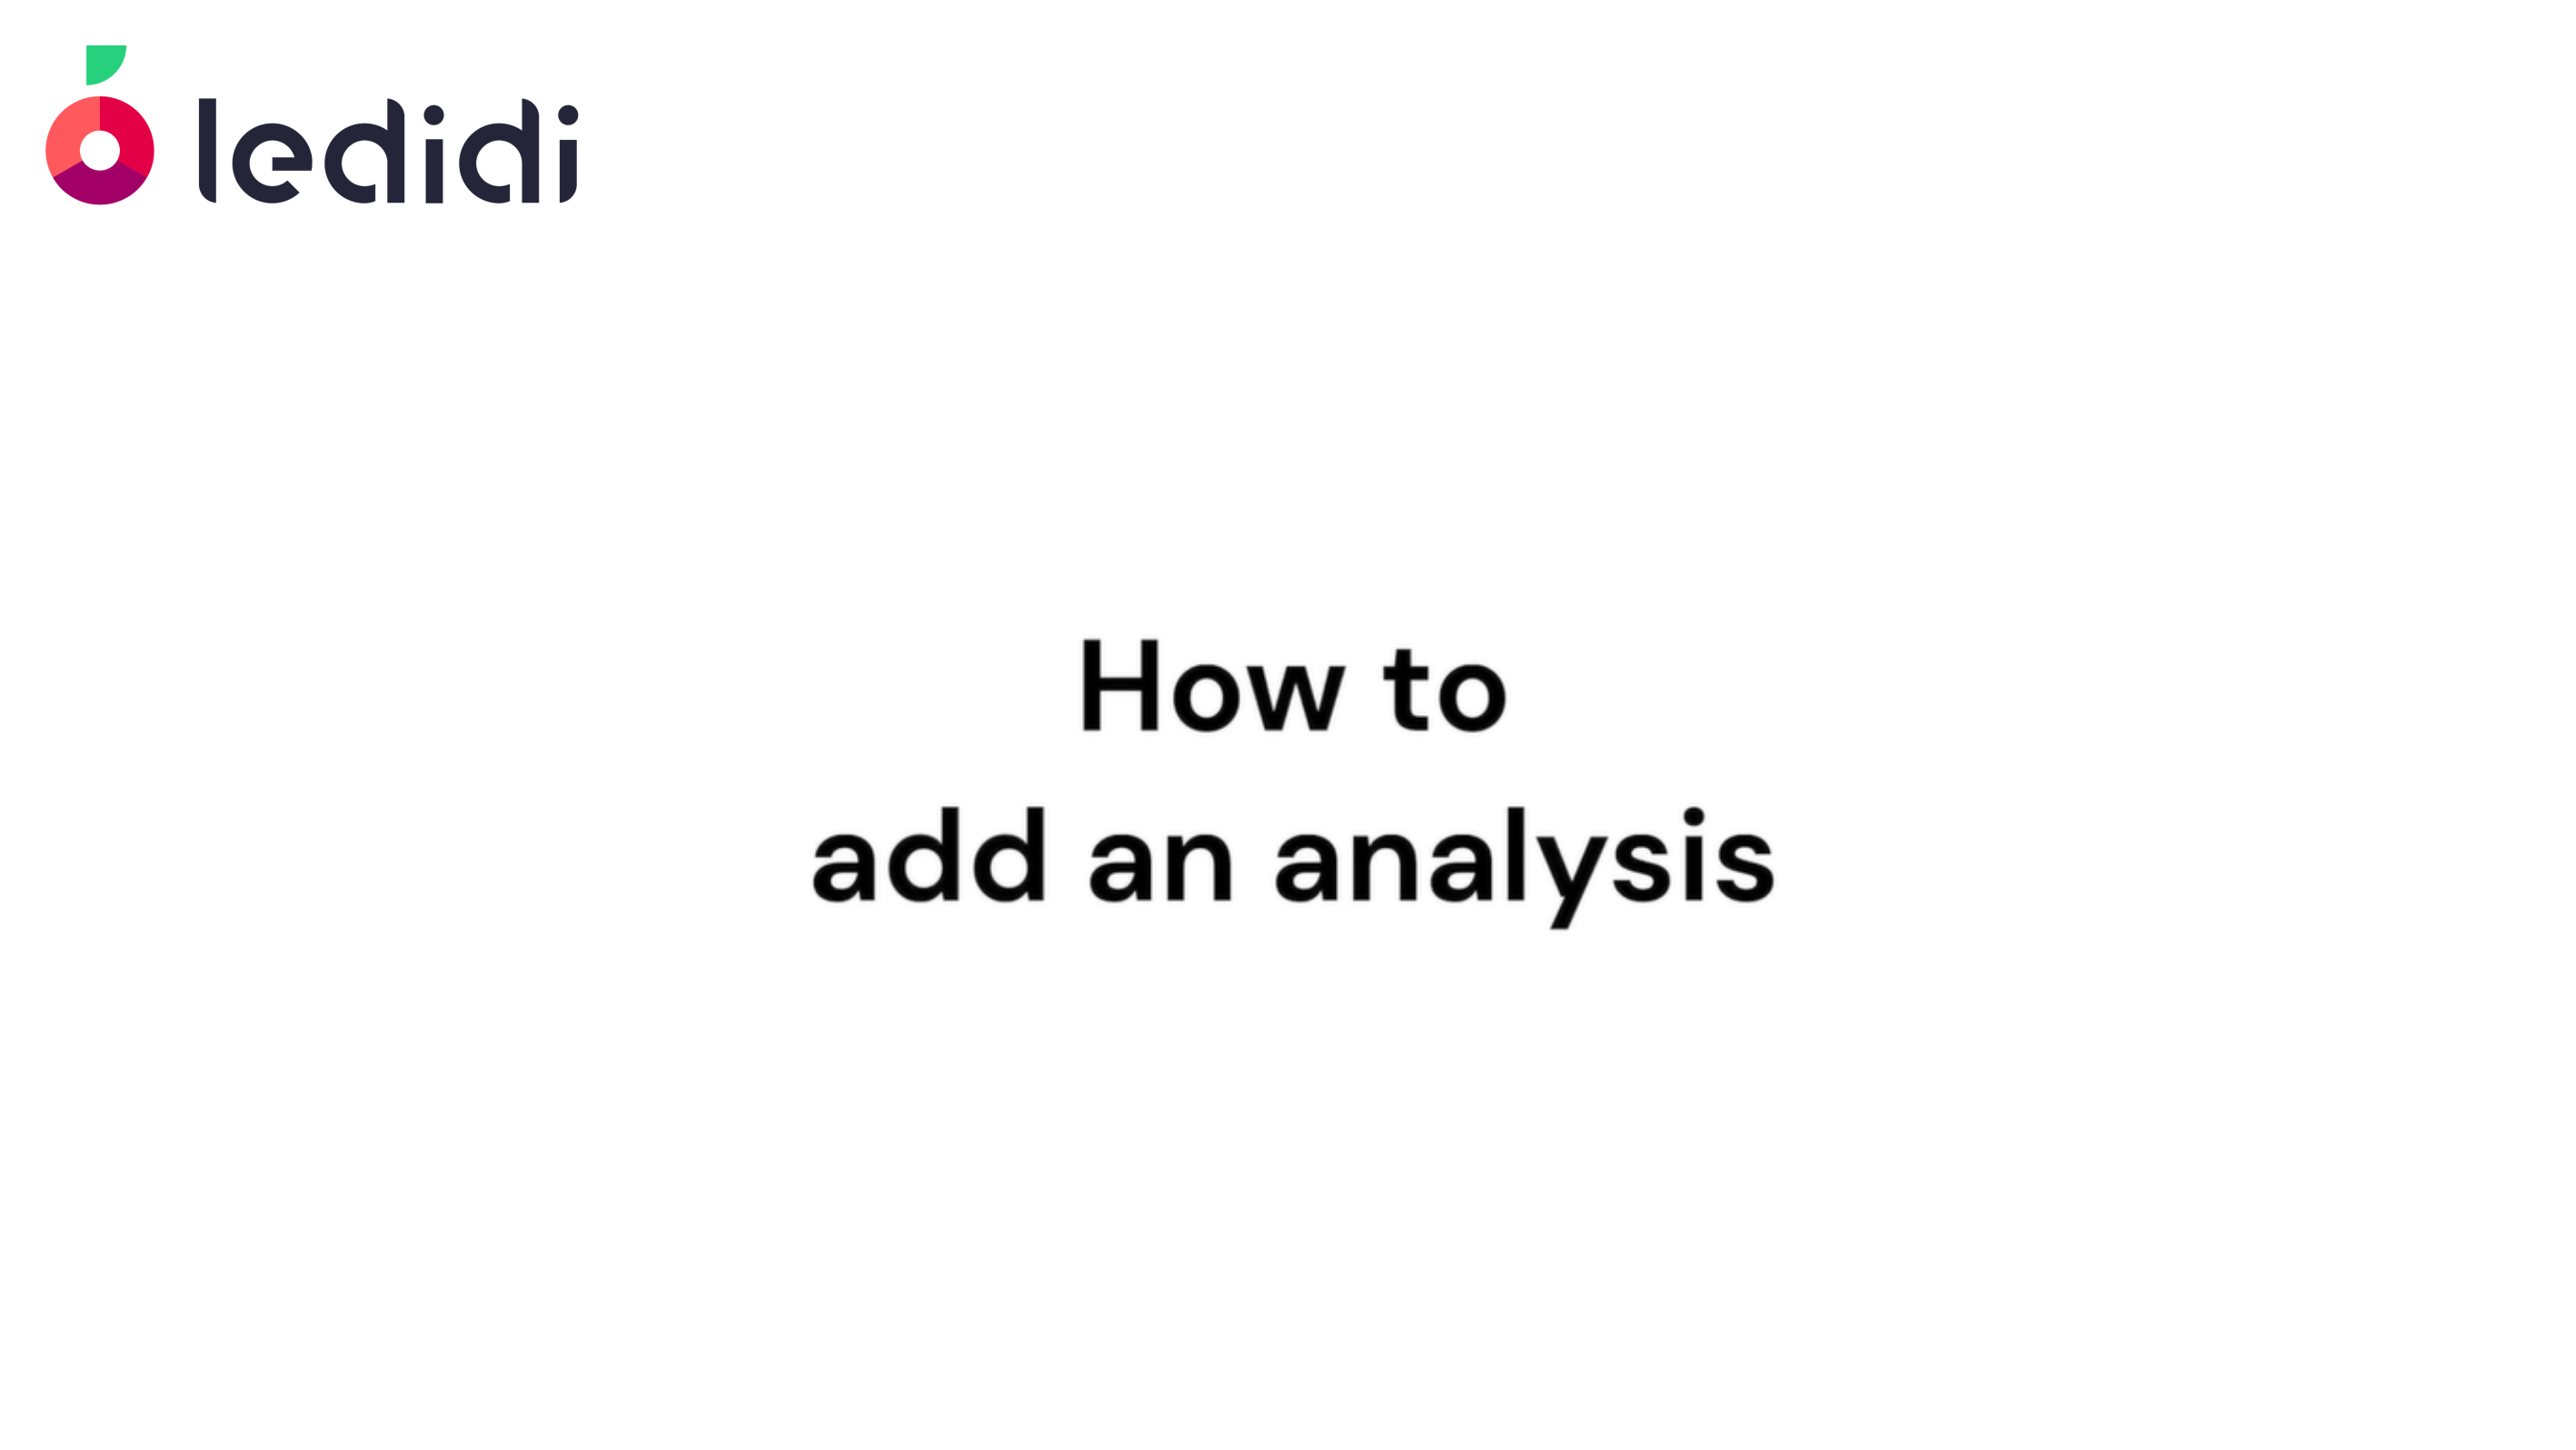 How to add an analysis